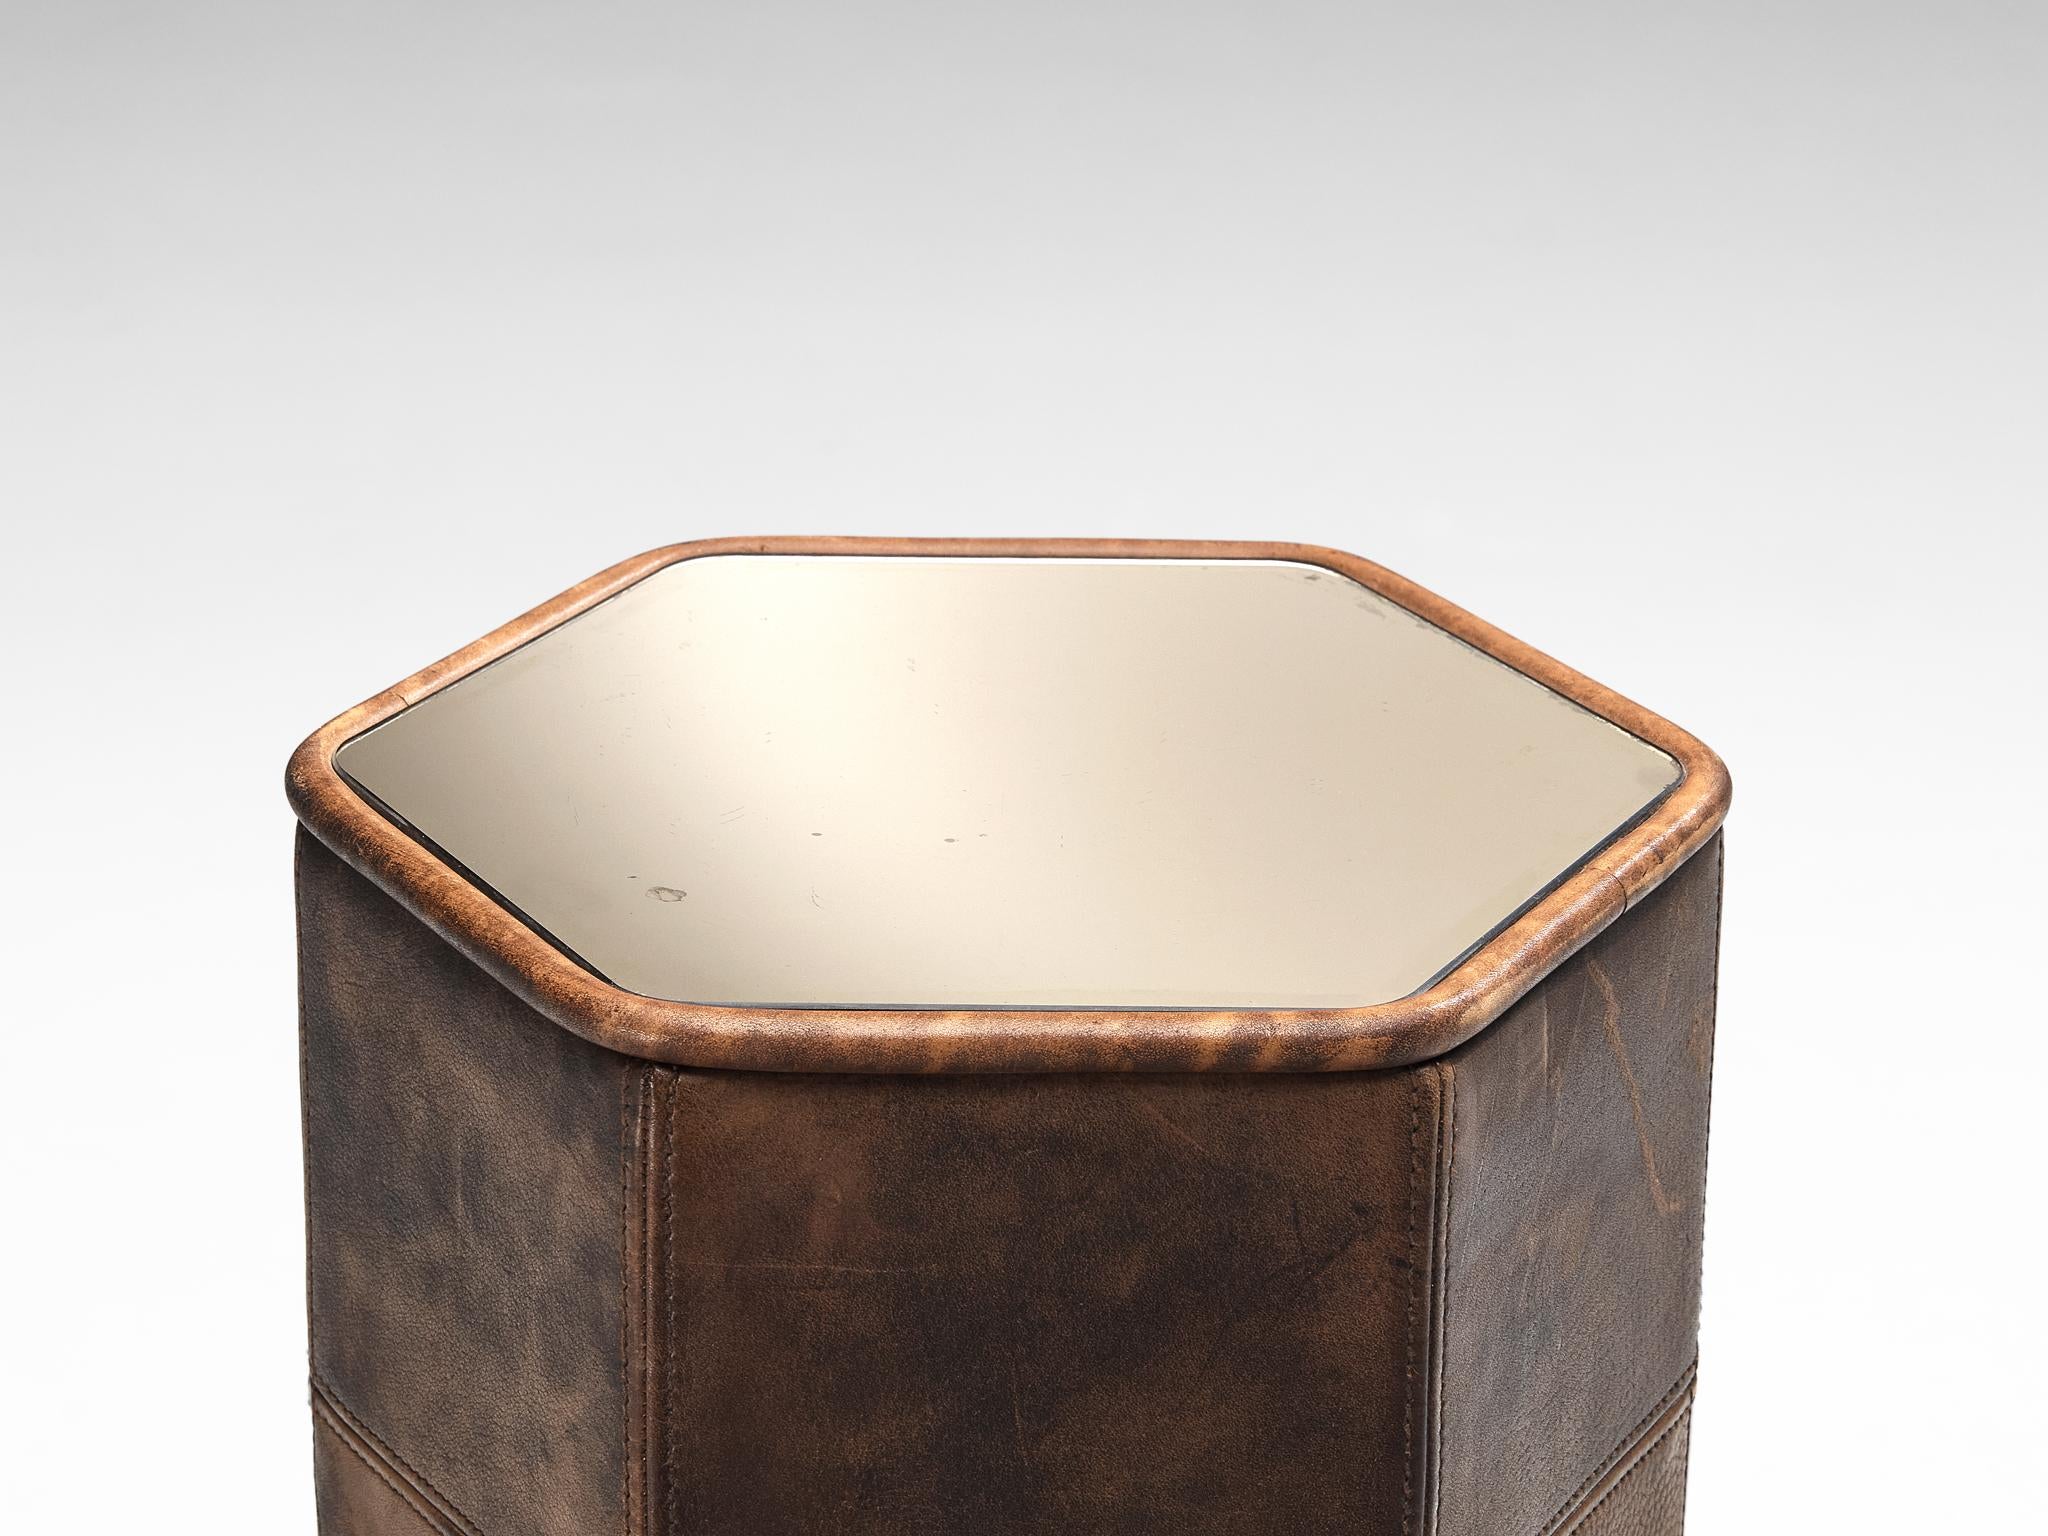 Pedestal or Side Table in Patchwork Leather with Mirrored Top